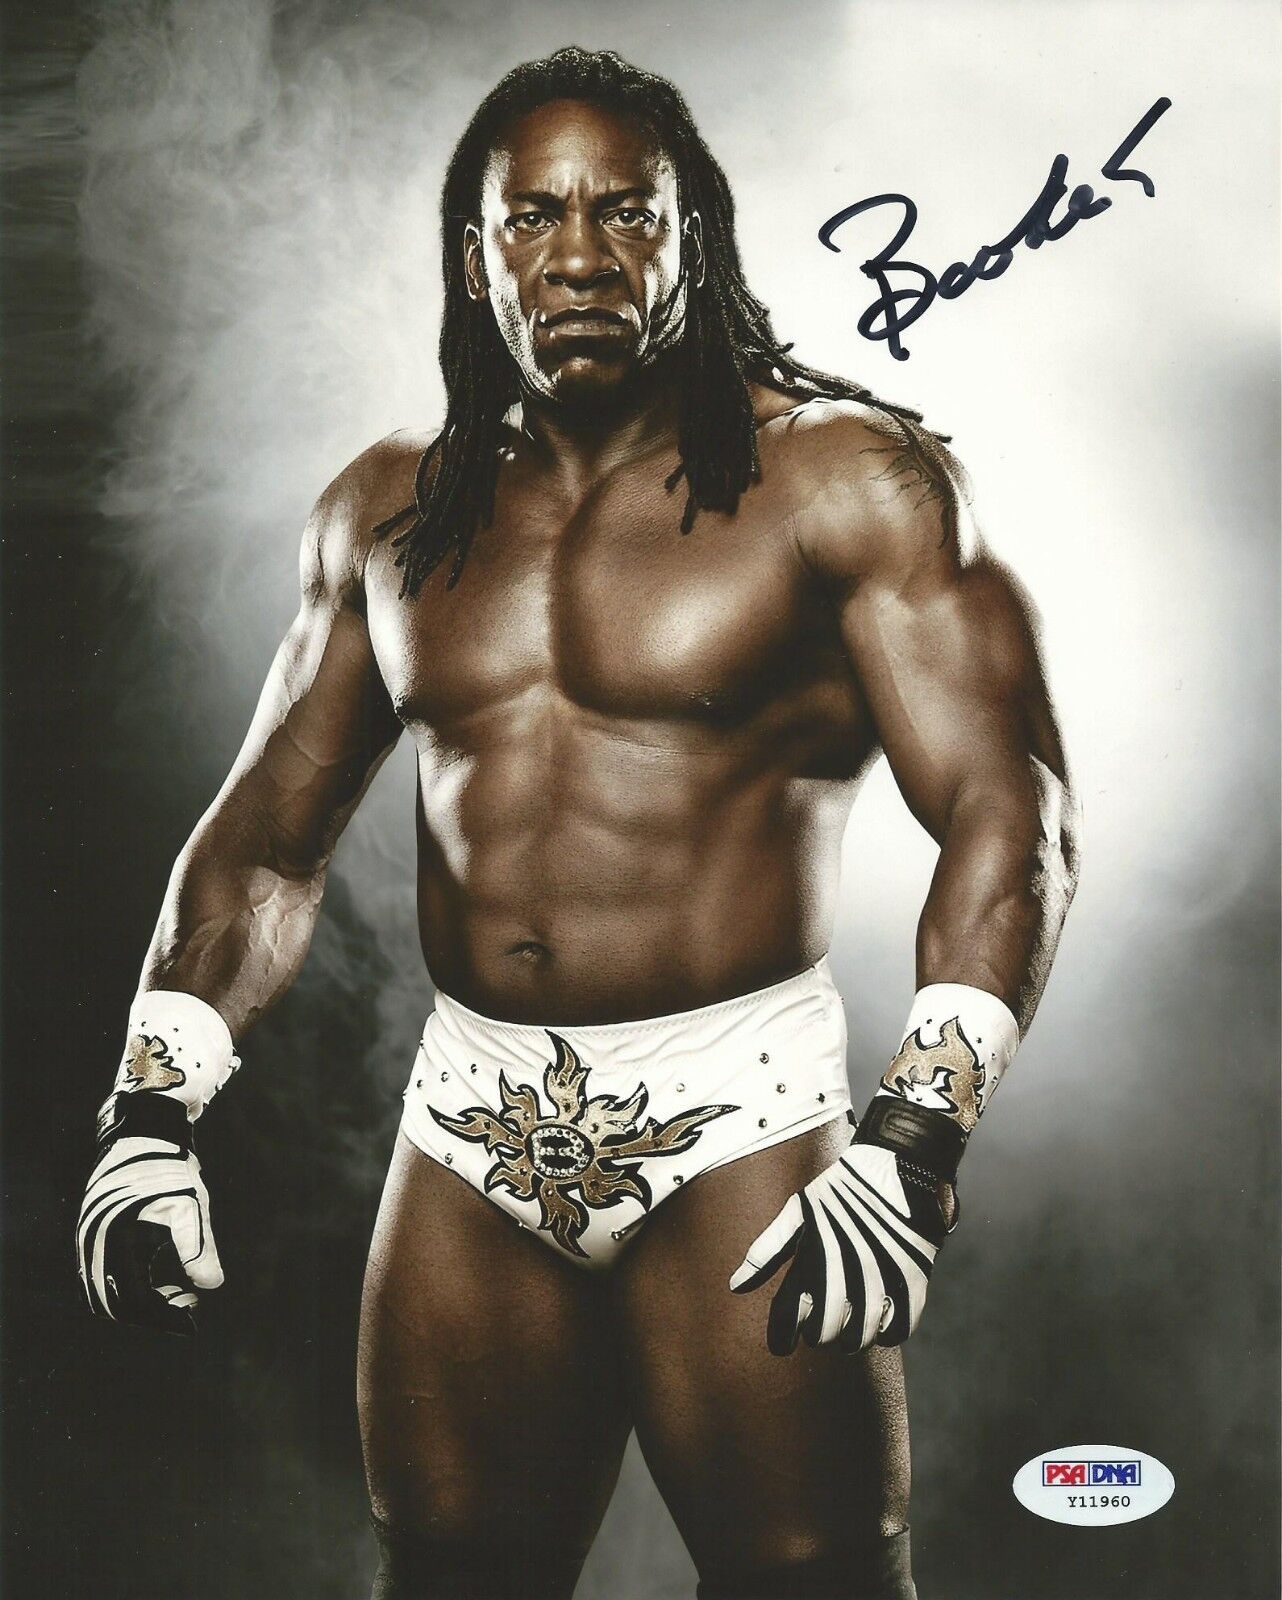 Booker T Signed WWE 8x10 Photo Poster painting PSA/DNA COA Pro Wrestling Picture Autograph Champ